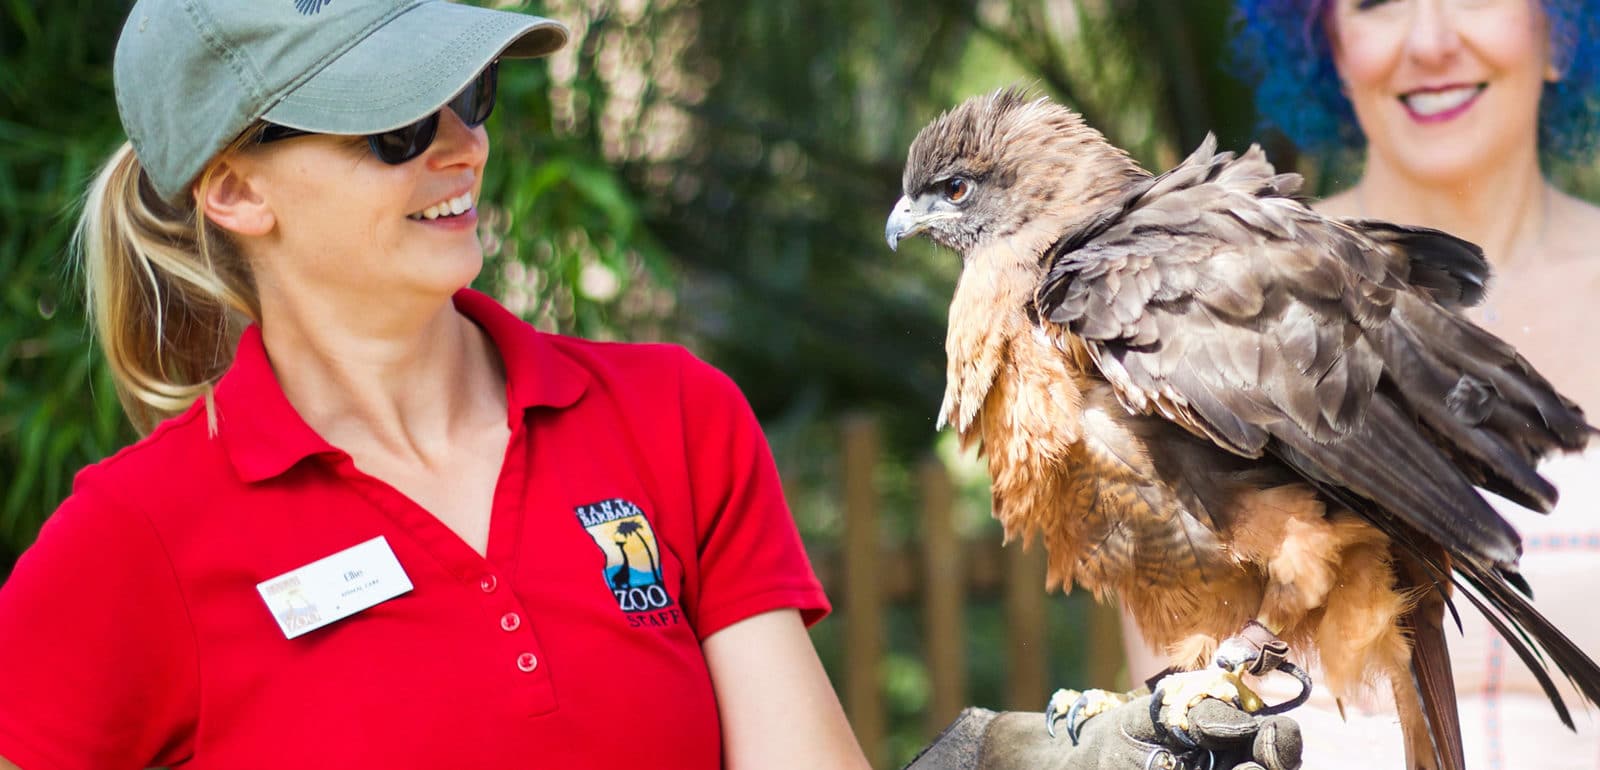 zookeeper looking at red-tailed hawk that is perched on her gloved hand